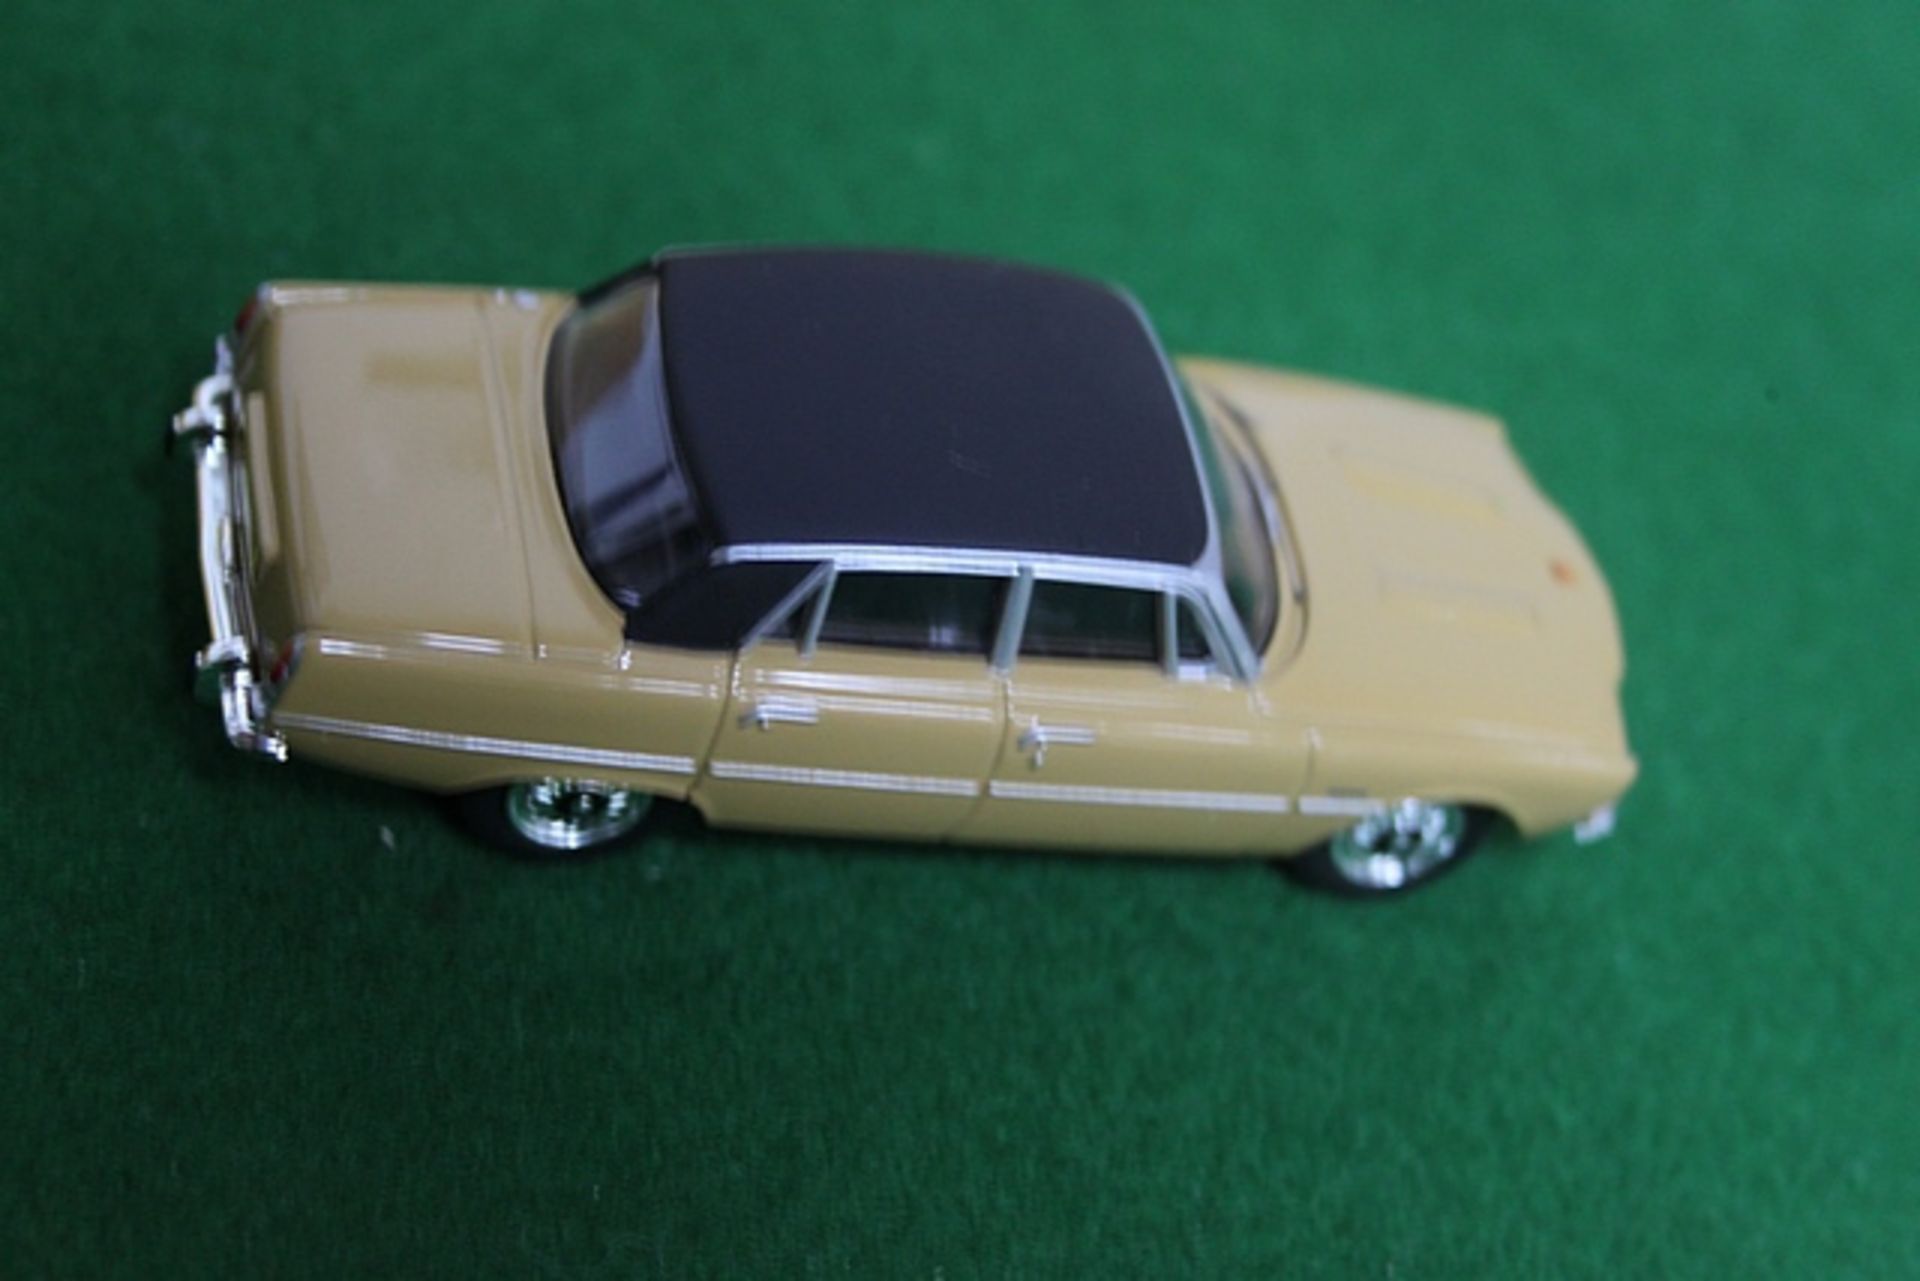 Vanguards # VA06500 Diecast Rover 3500 V8 In Almond Scale 1/43 Complete With Box - Image 2 of 3